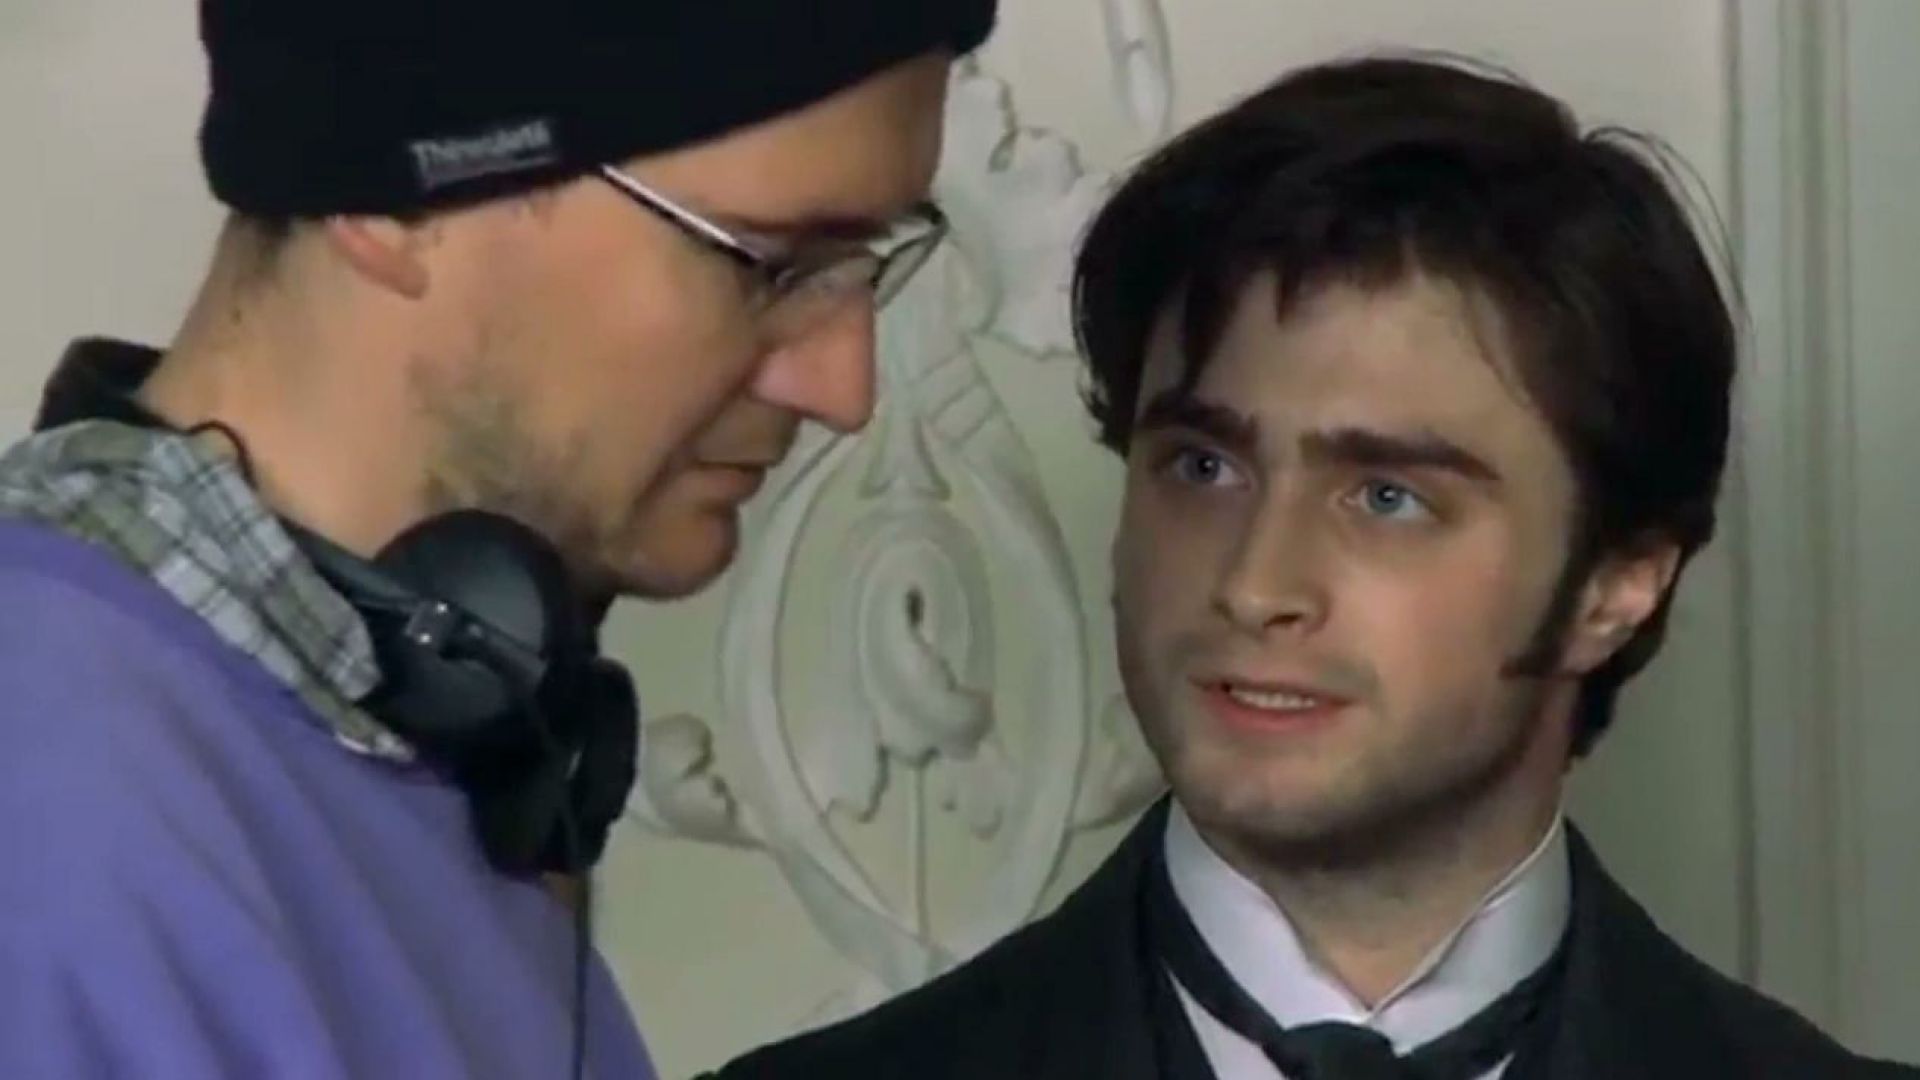 Director James Watkins and Daniel Radcliffe on Arthur in The Woman in Black